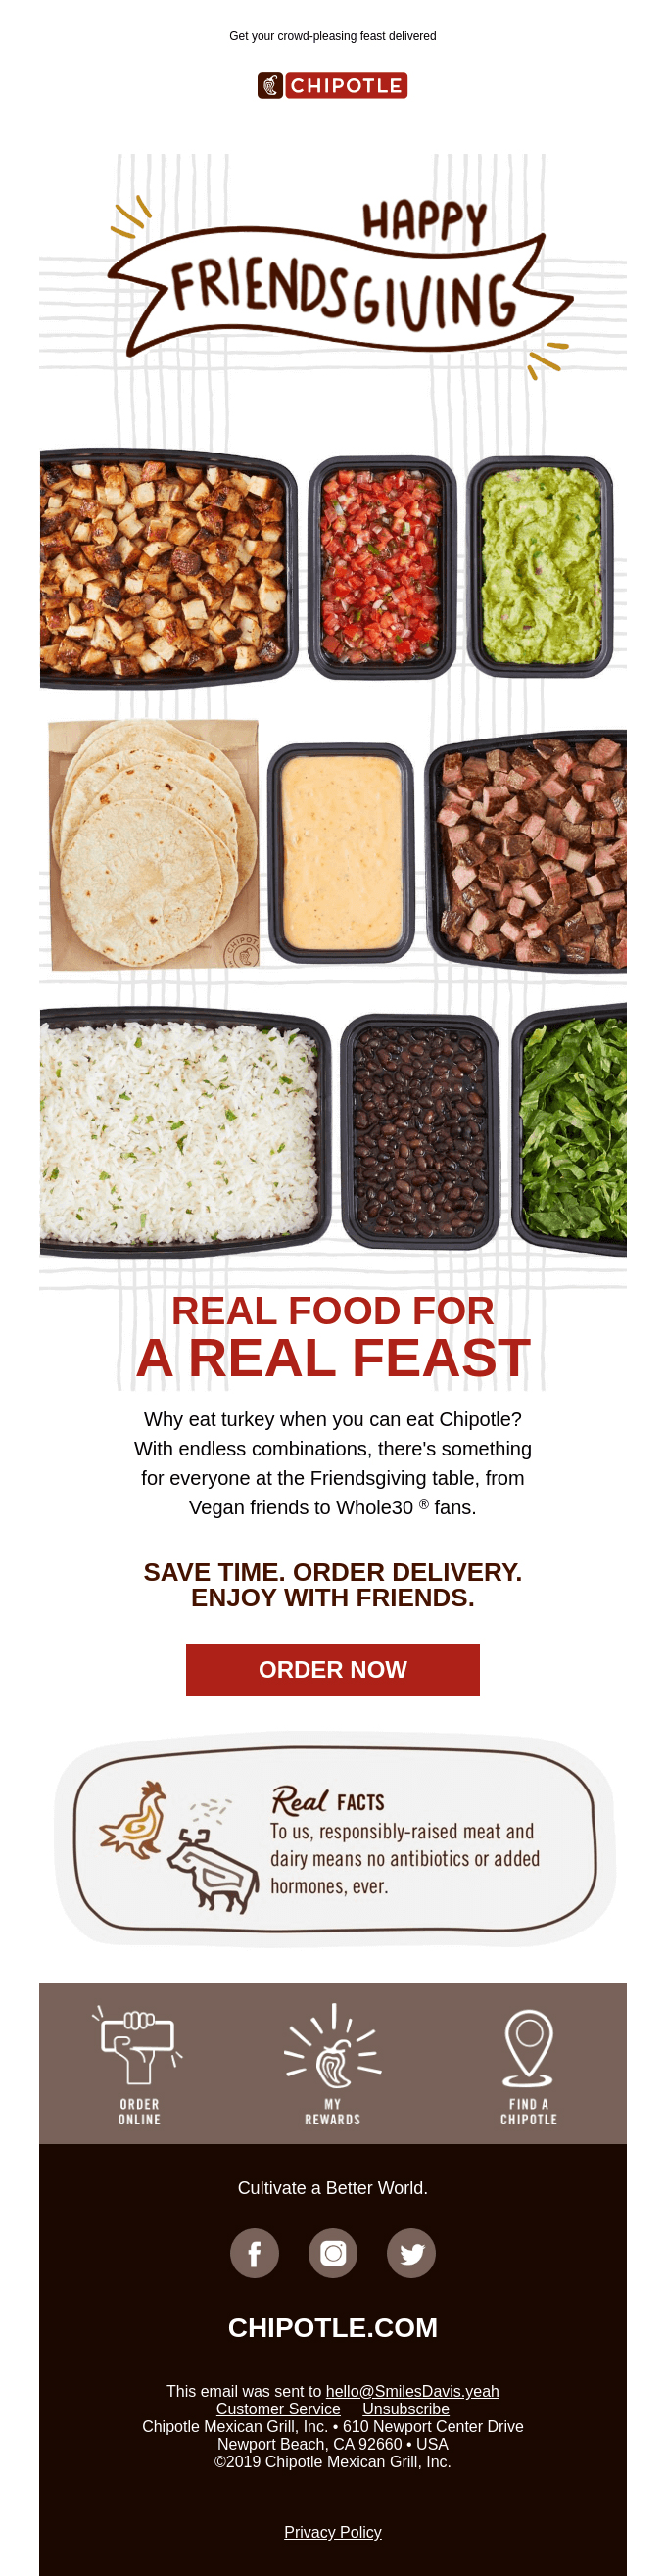 Chipotle- Thanksgiving email